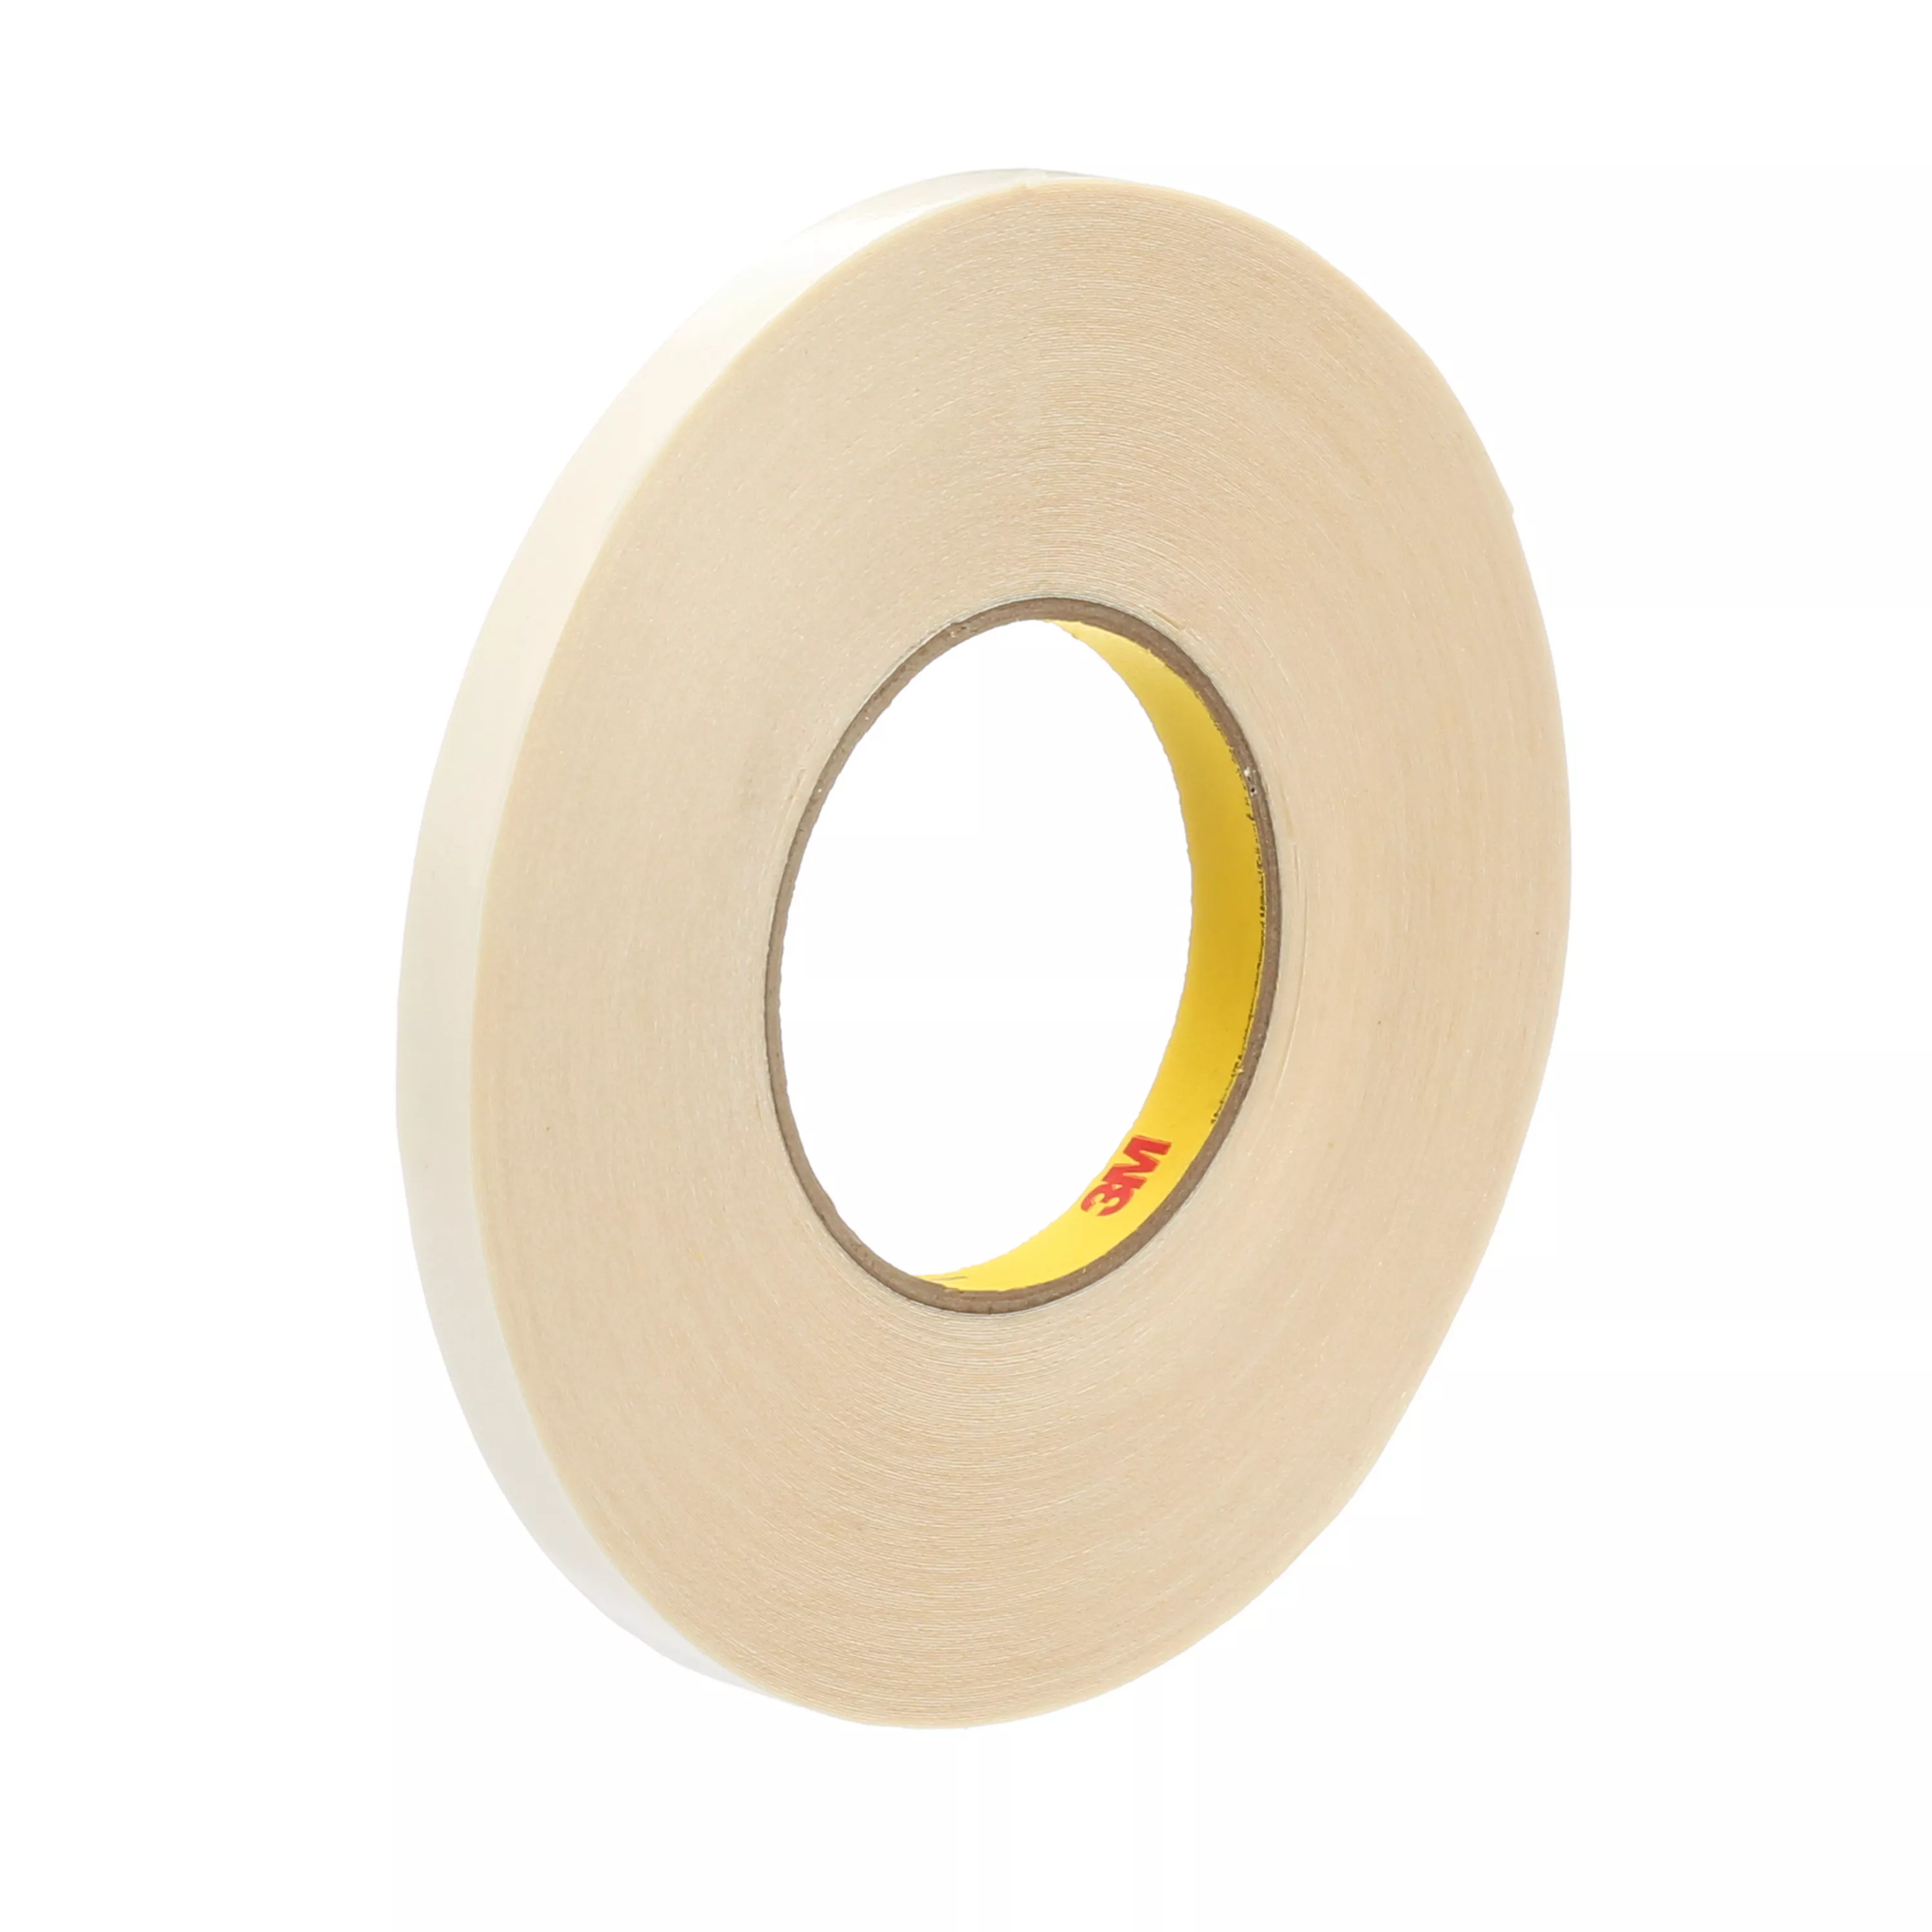 3M™ Venture Tape™ Double Coated Tape 514CWR, Red, 1575 mm x 50 m, 0.01
mm, 1 Roll/Case, Untrimmed Log